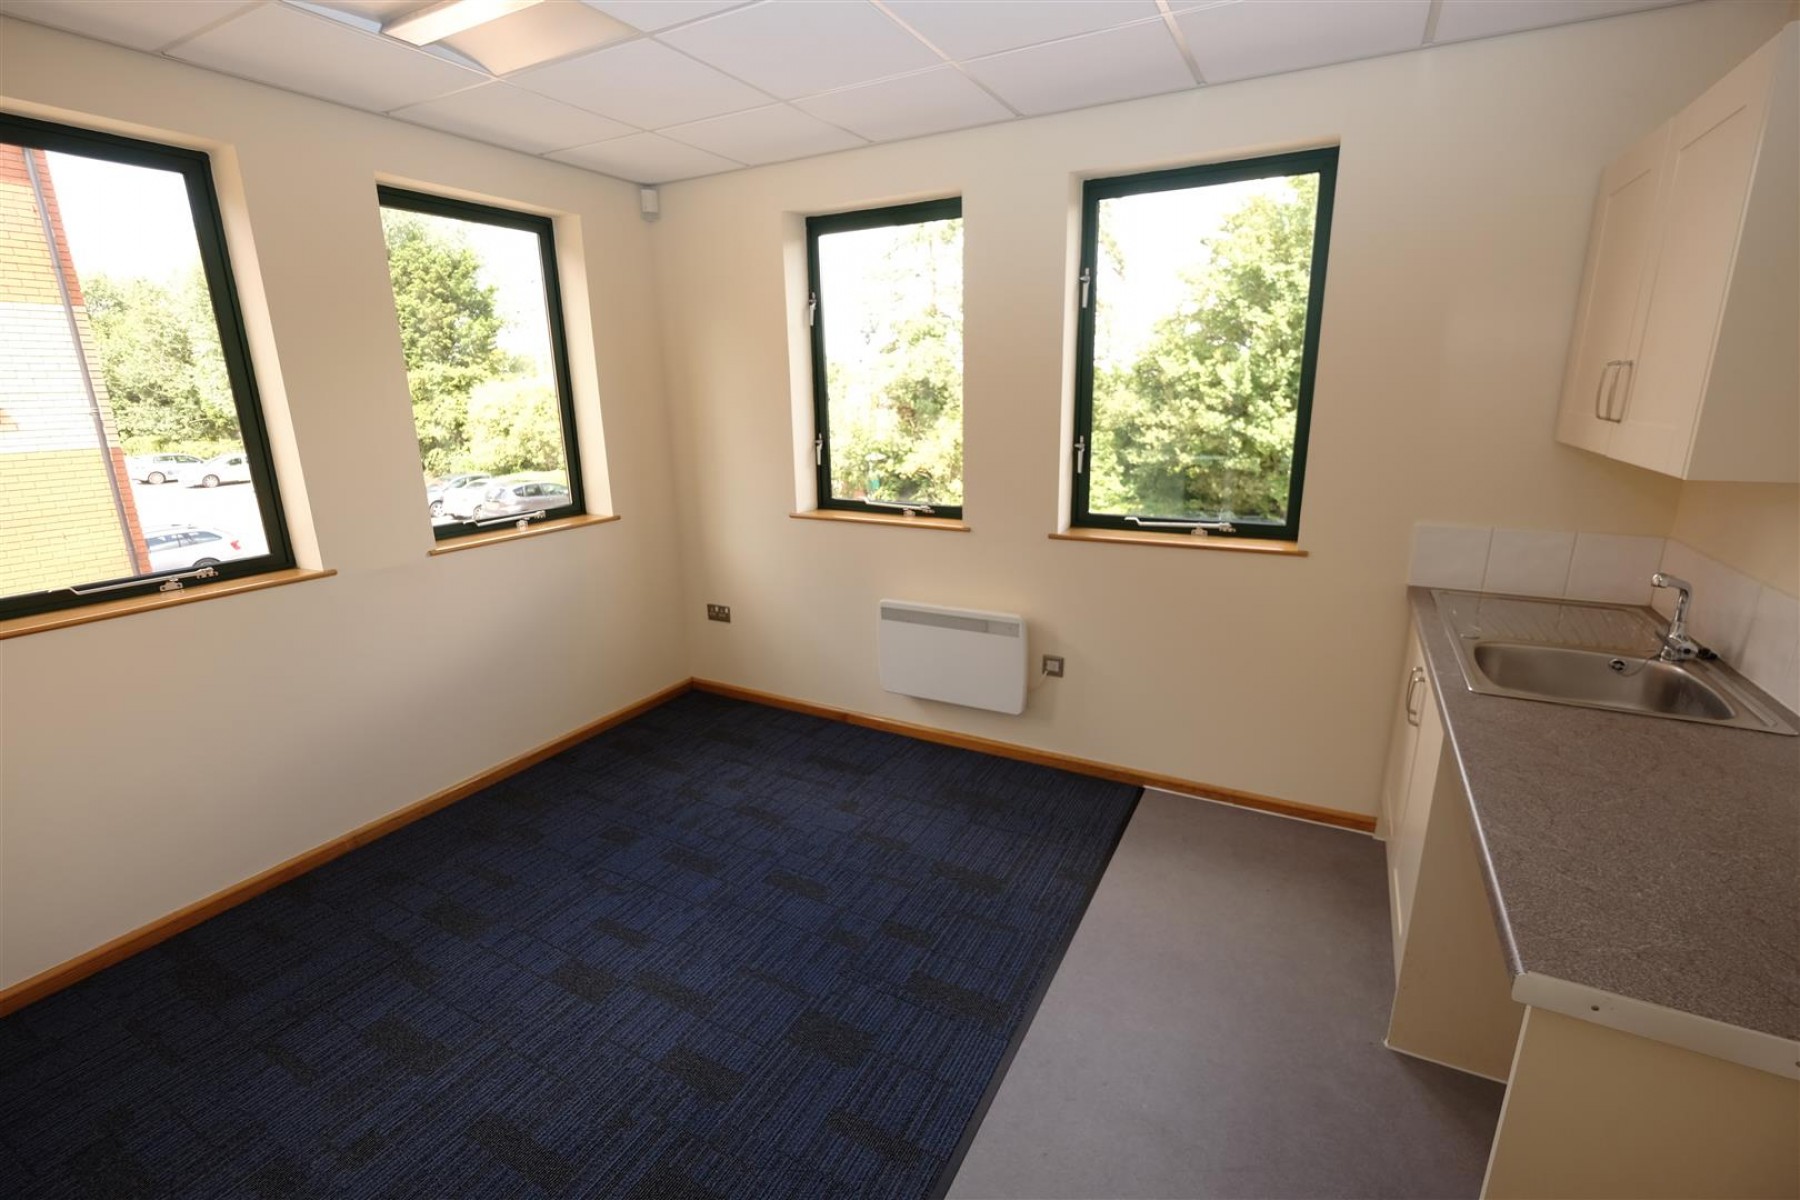 Images for COMMERCIAL INVESTMENT - POTENTIAL £70K PA